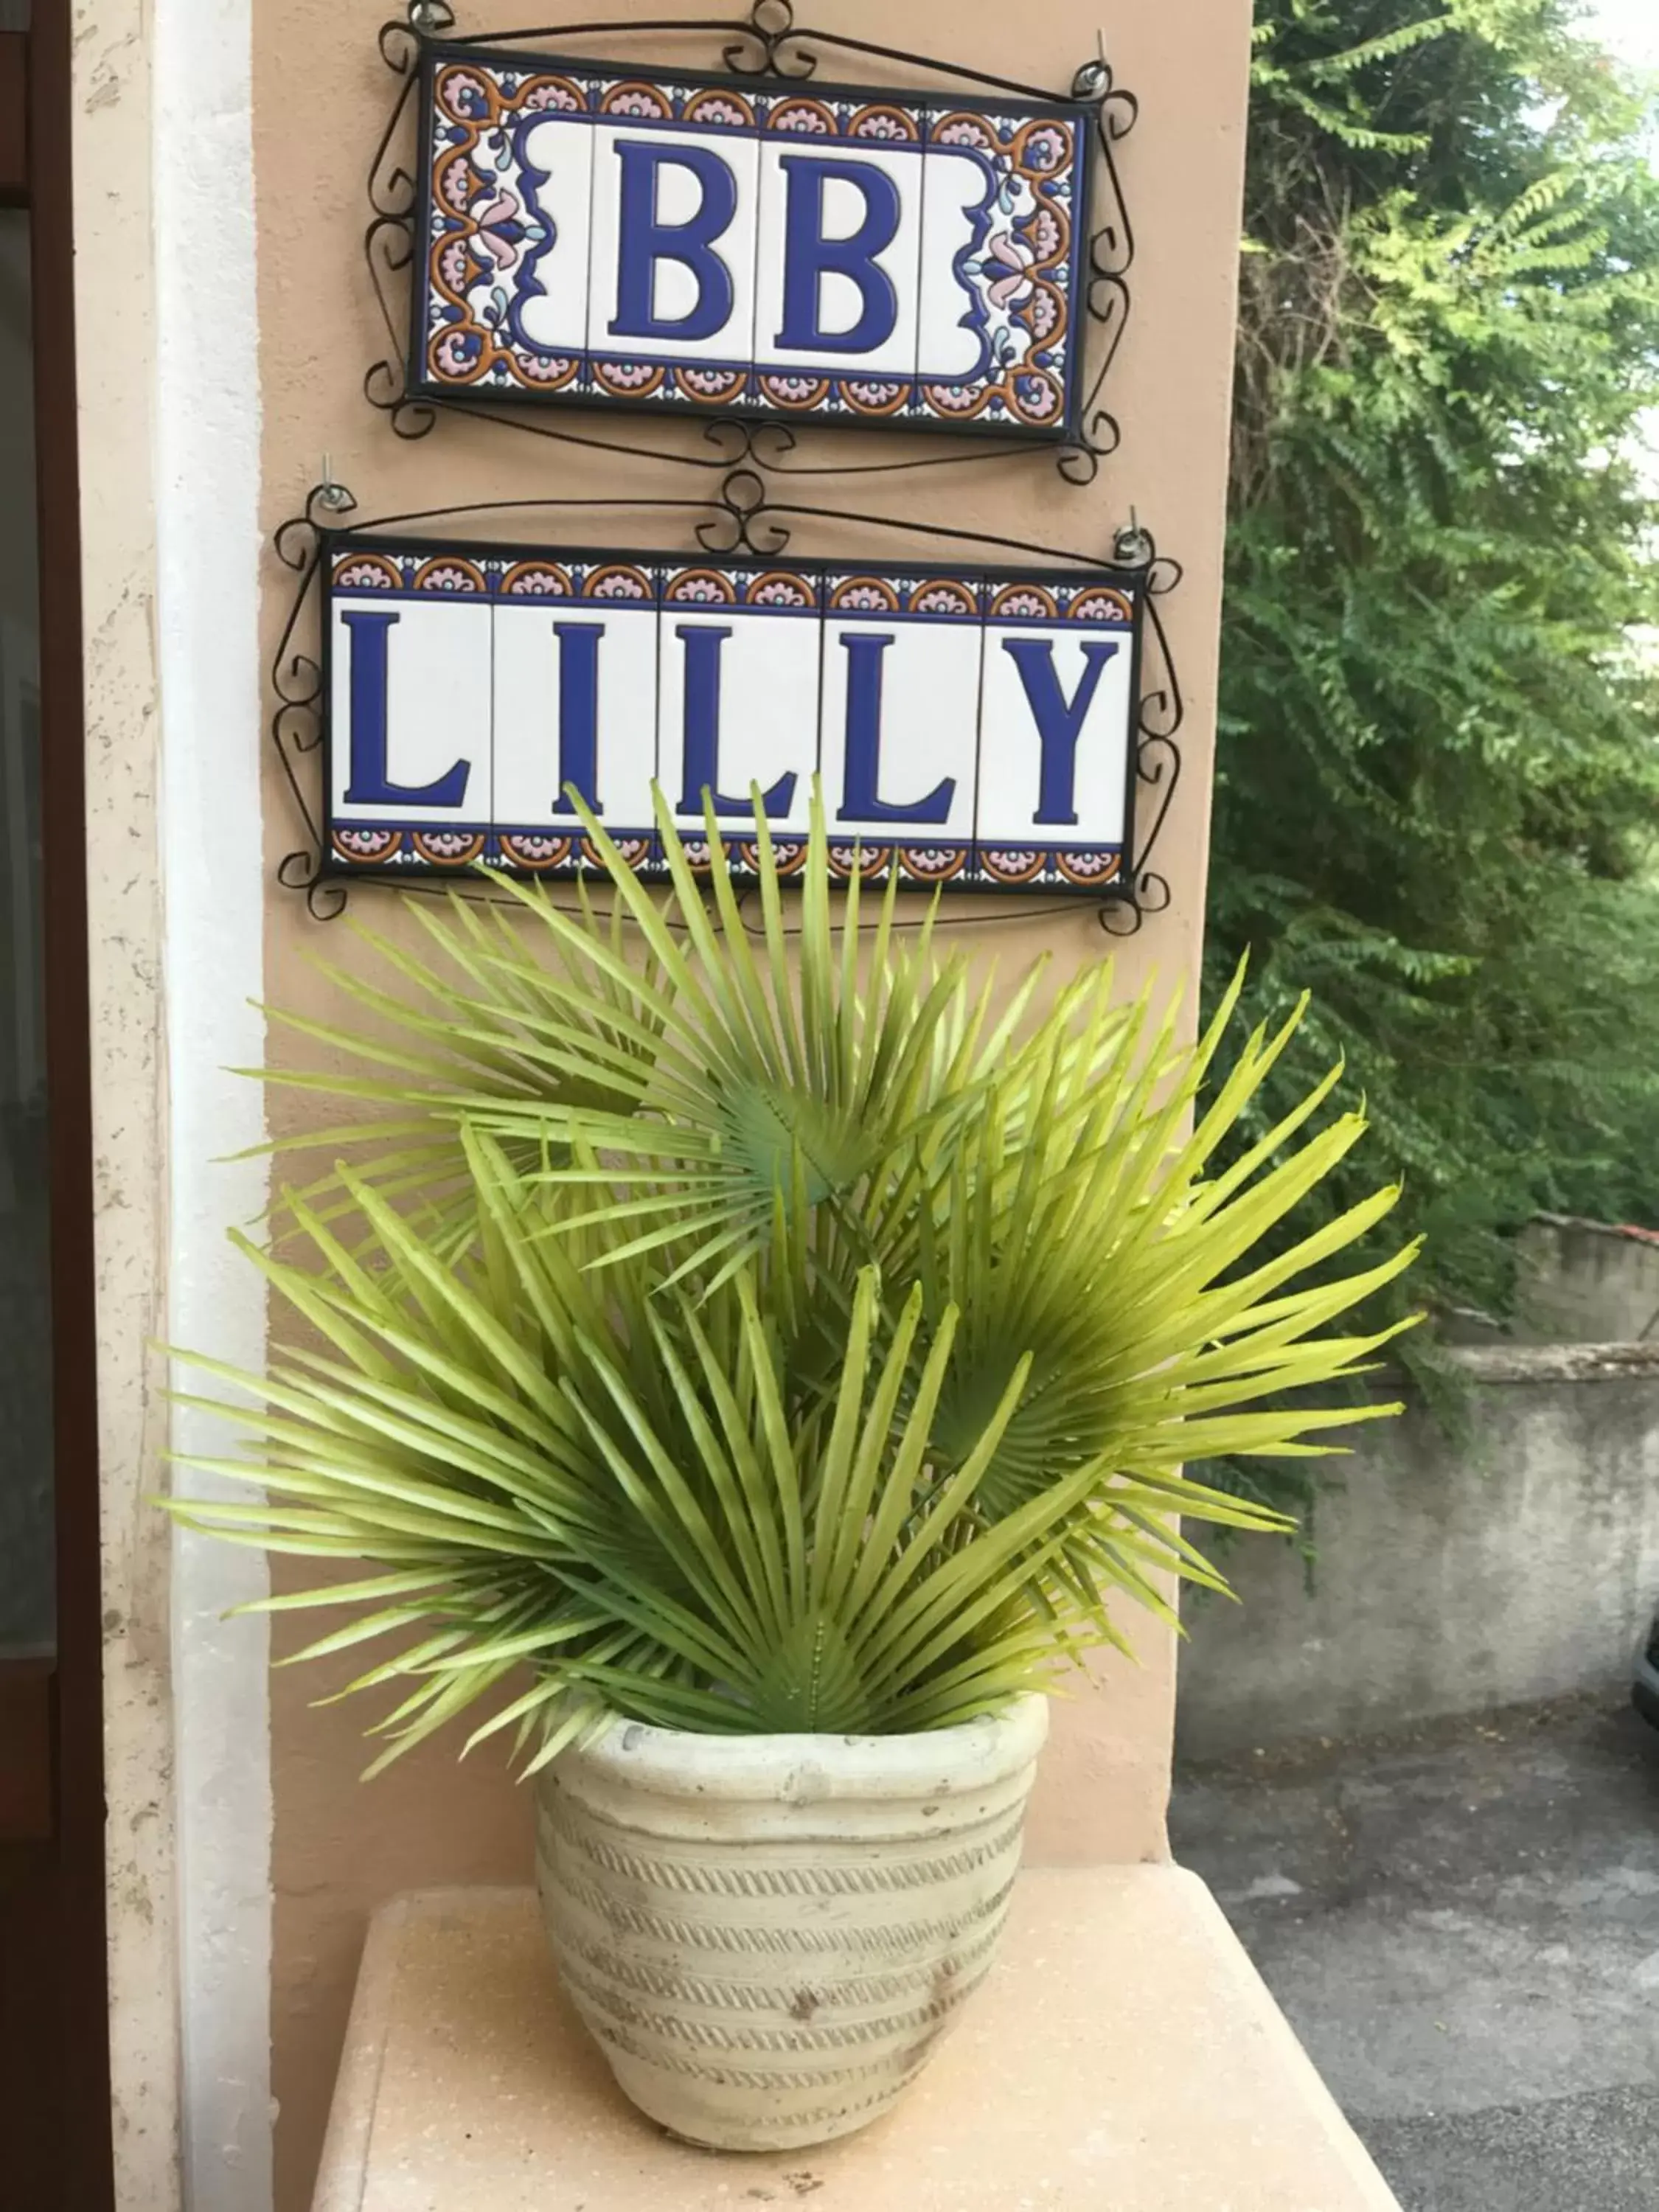 Property logo or sign in Lilly